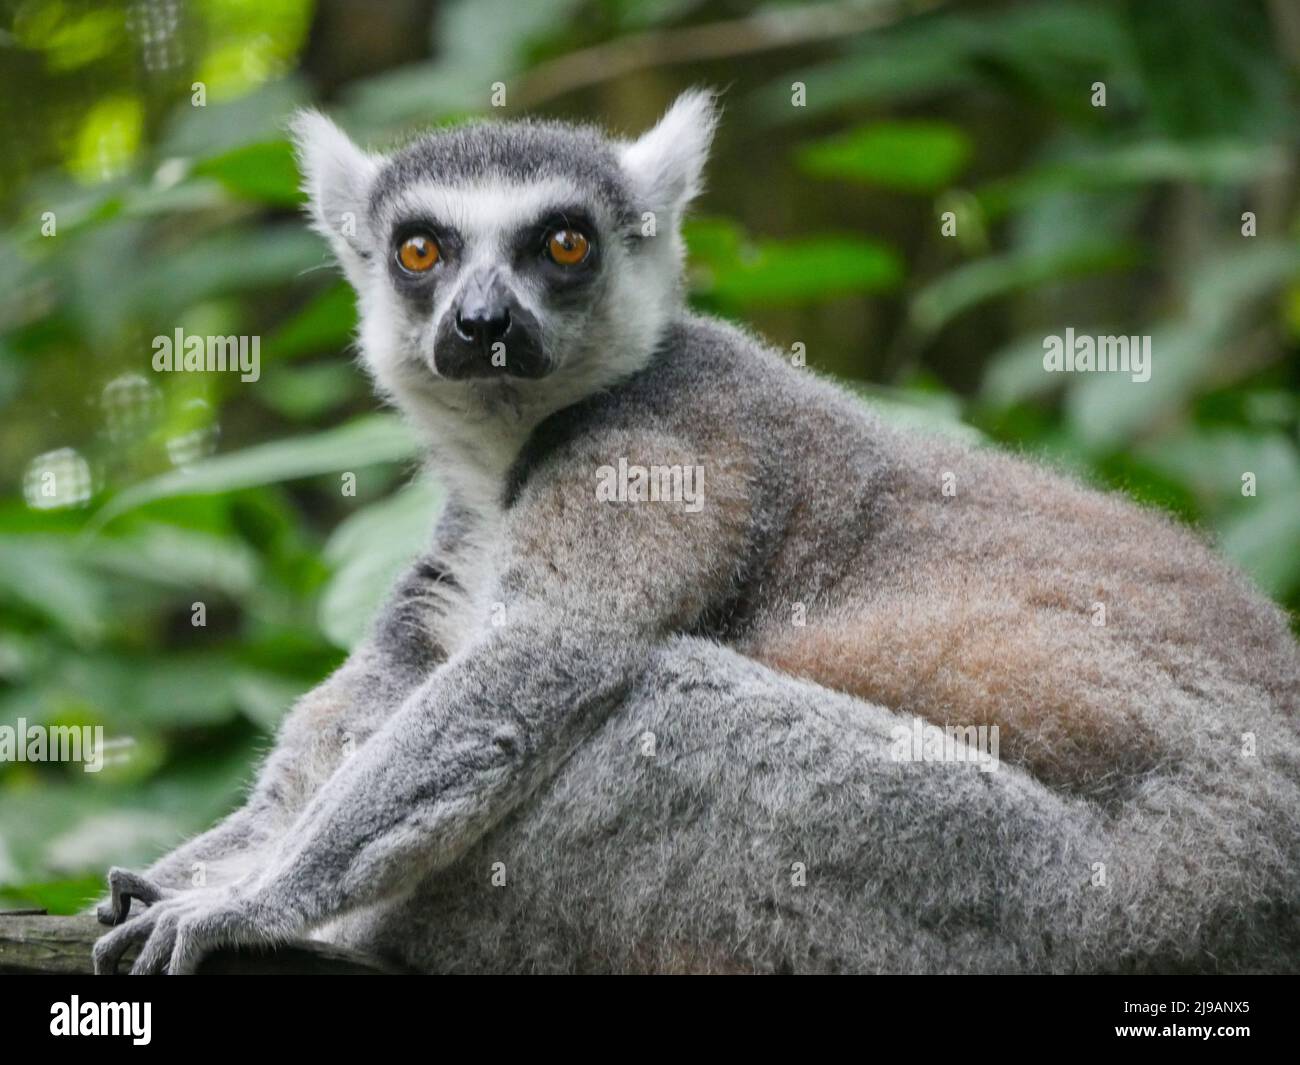 Ring-tailed lemur : The ring tailed lemur (Lemur catta) is a large strepsirrhine primate and the most recognized lemur due to its long, black and whit Stock Photo